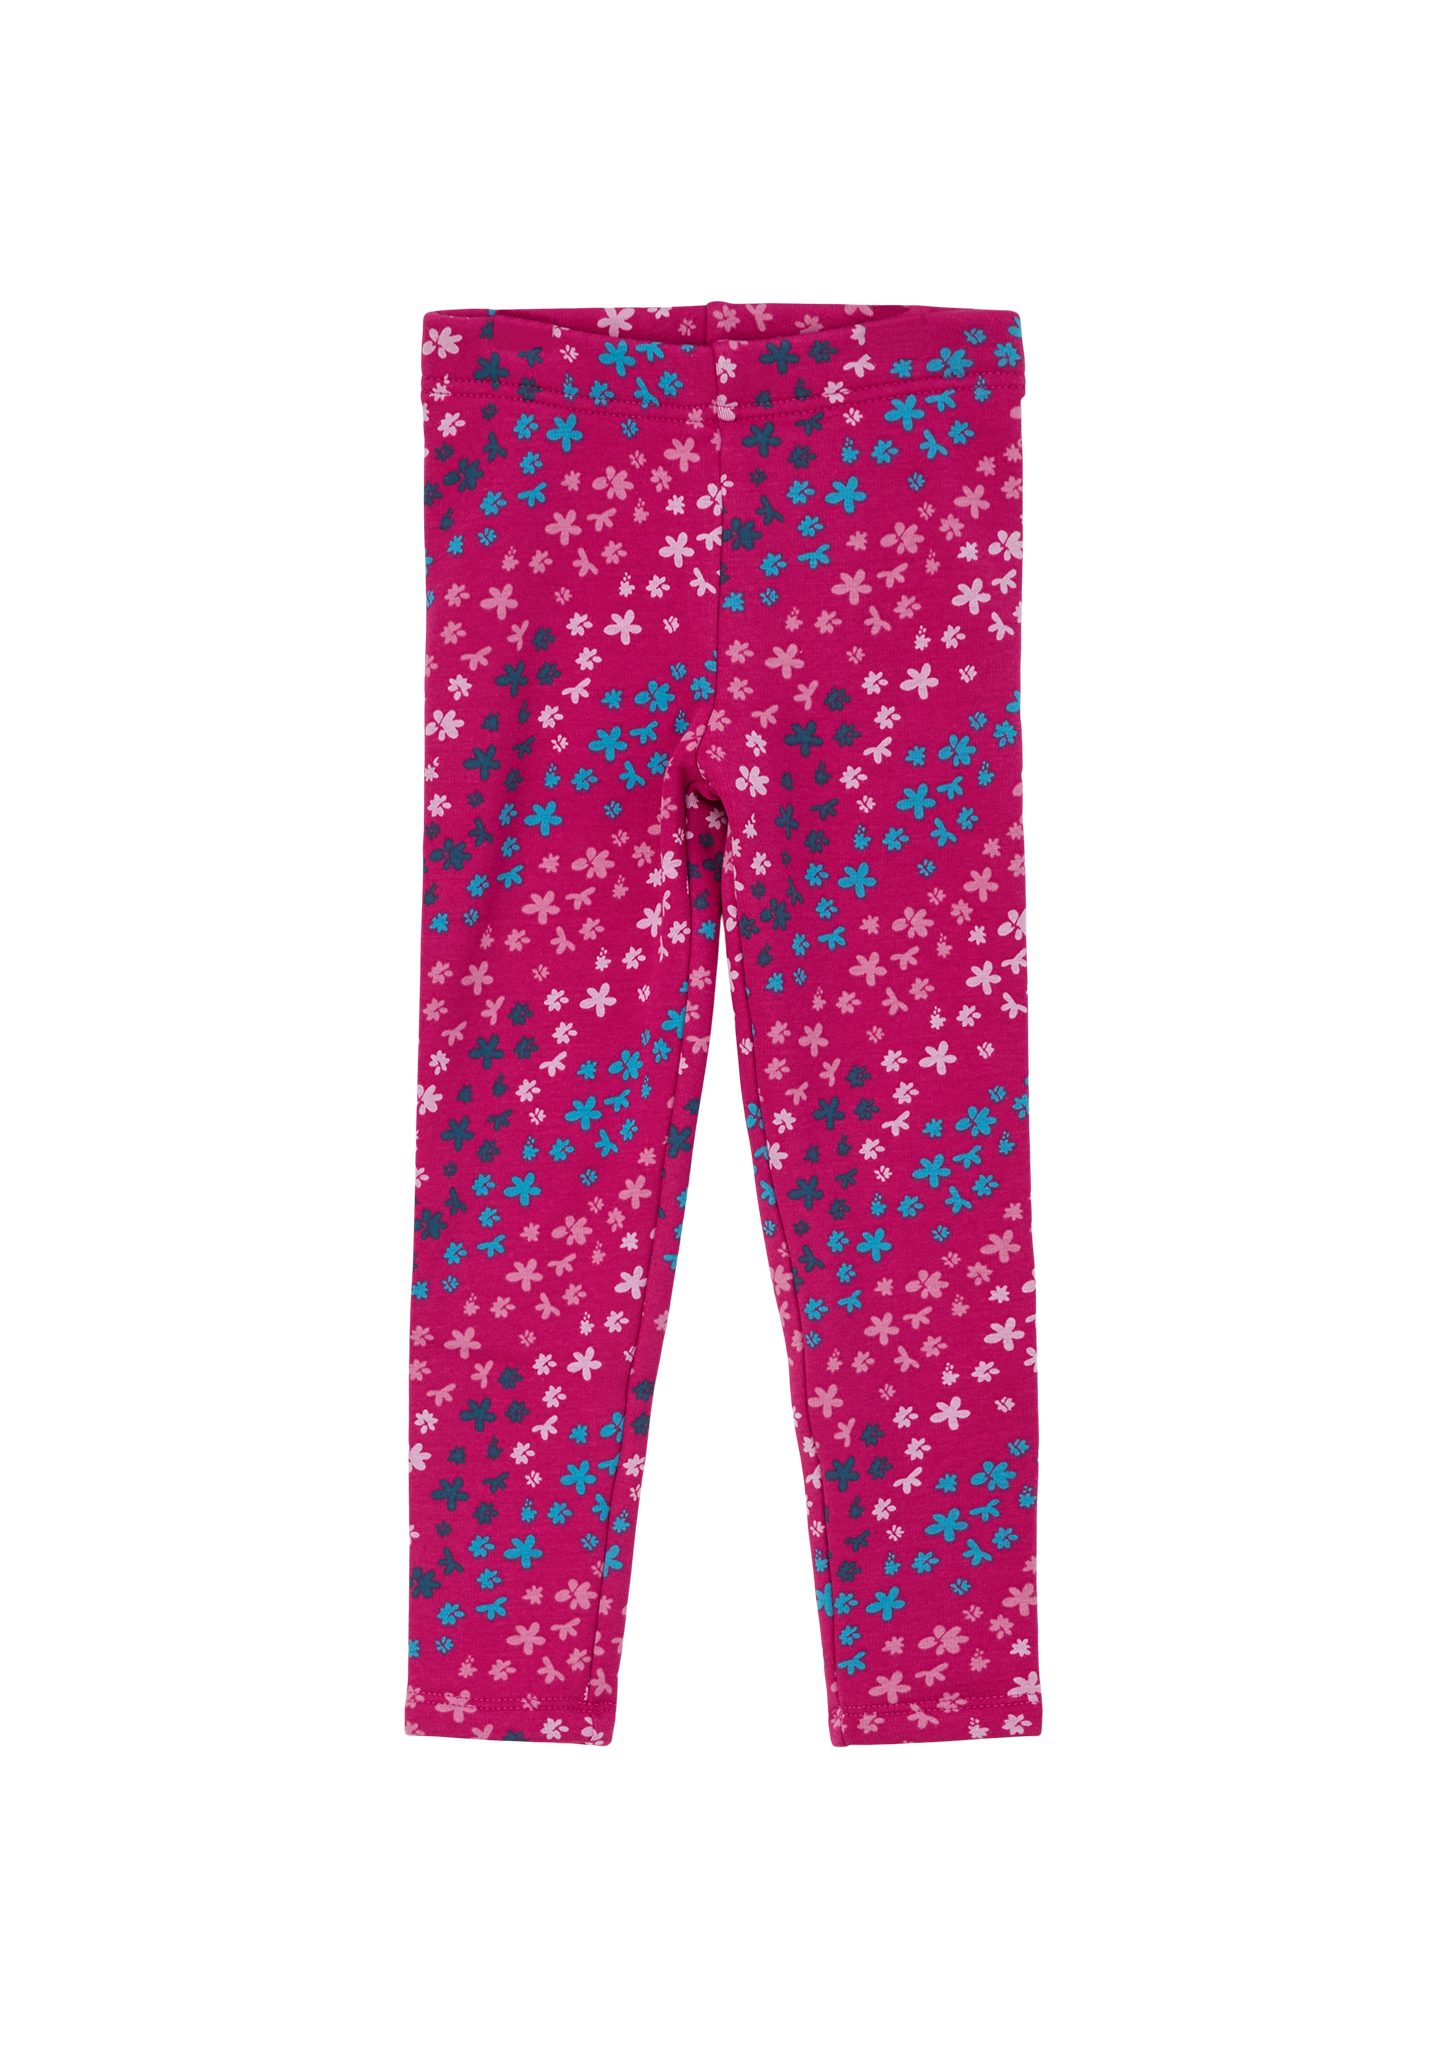 s.Oliver Leggings Leggings mit Thermofleece-Futter pink